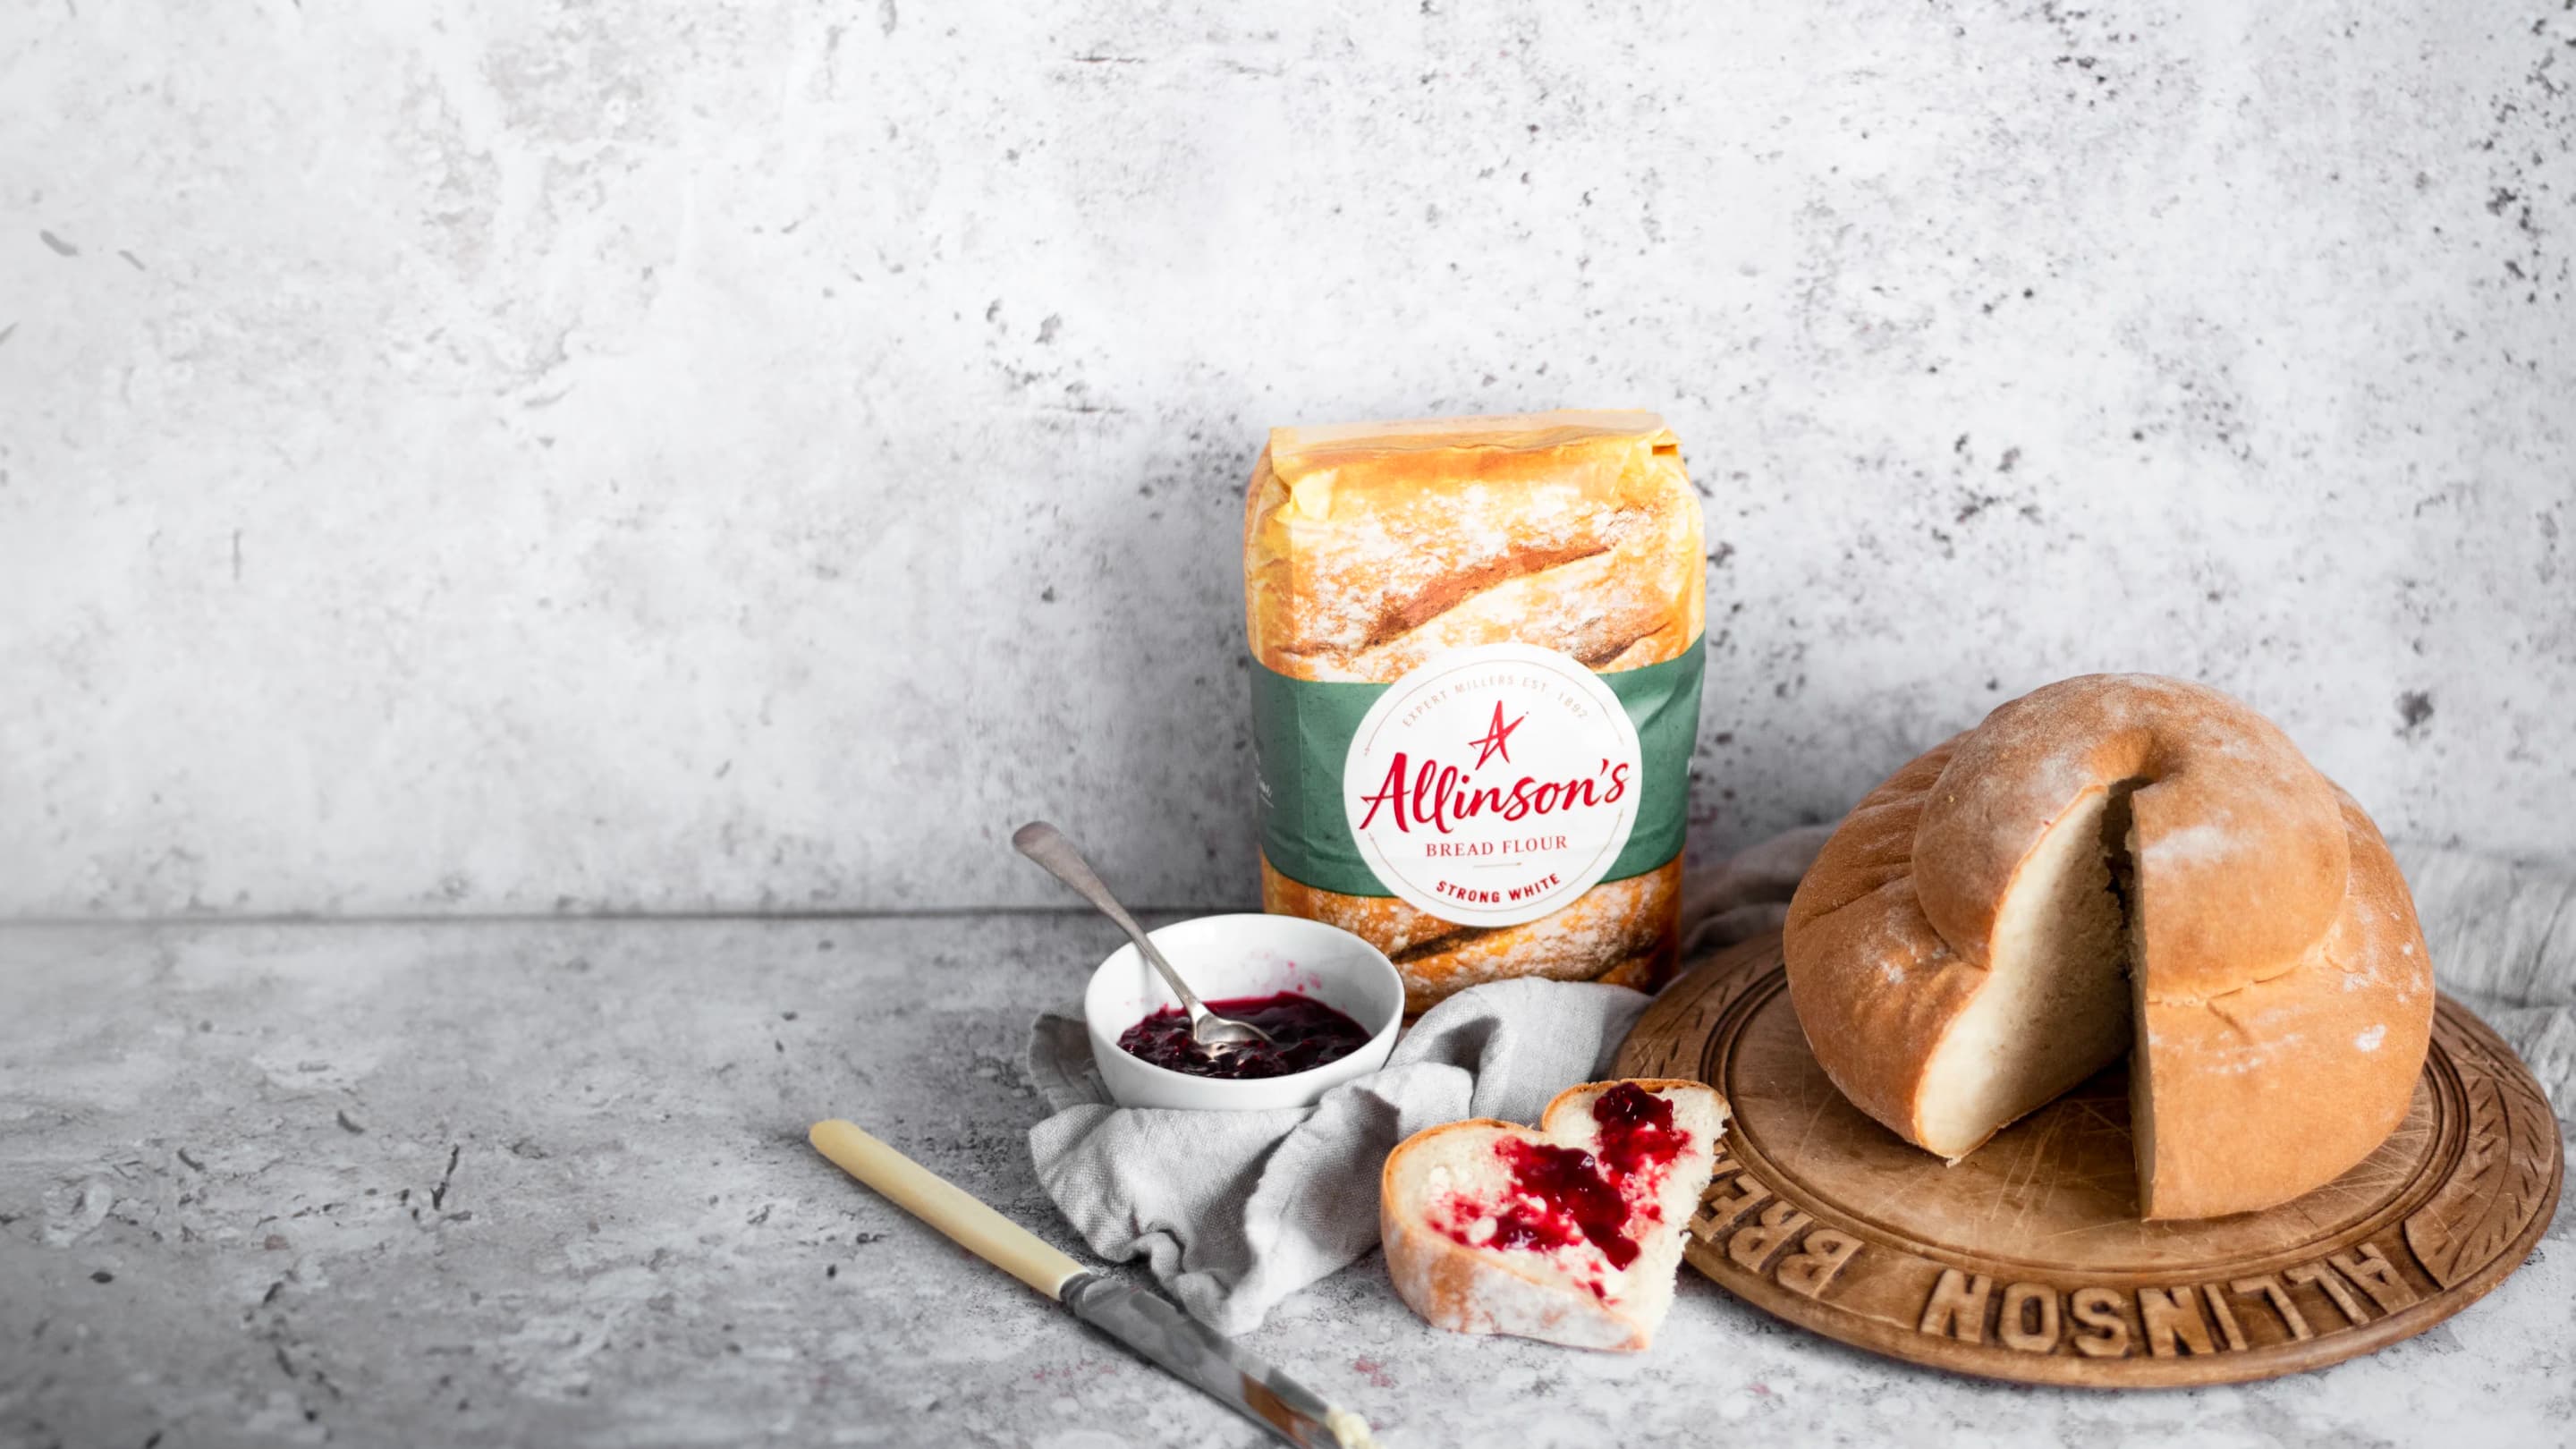 A freshly baked cottage loaf on a bread board site alongside a pack of Allinson's Strong White Bread Flour. A slice had been cut and spread with butter and jam.